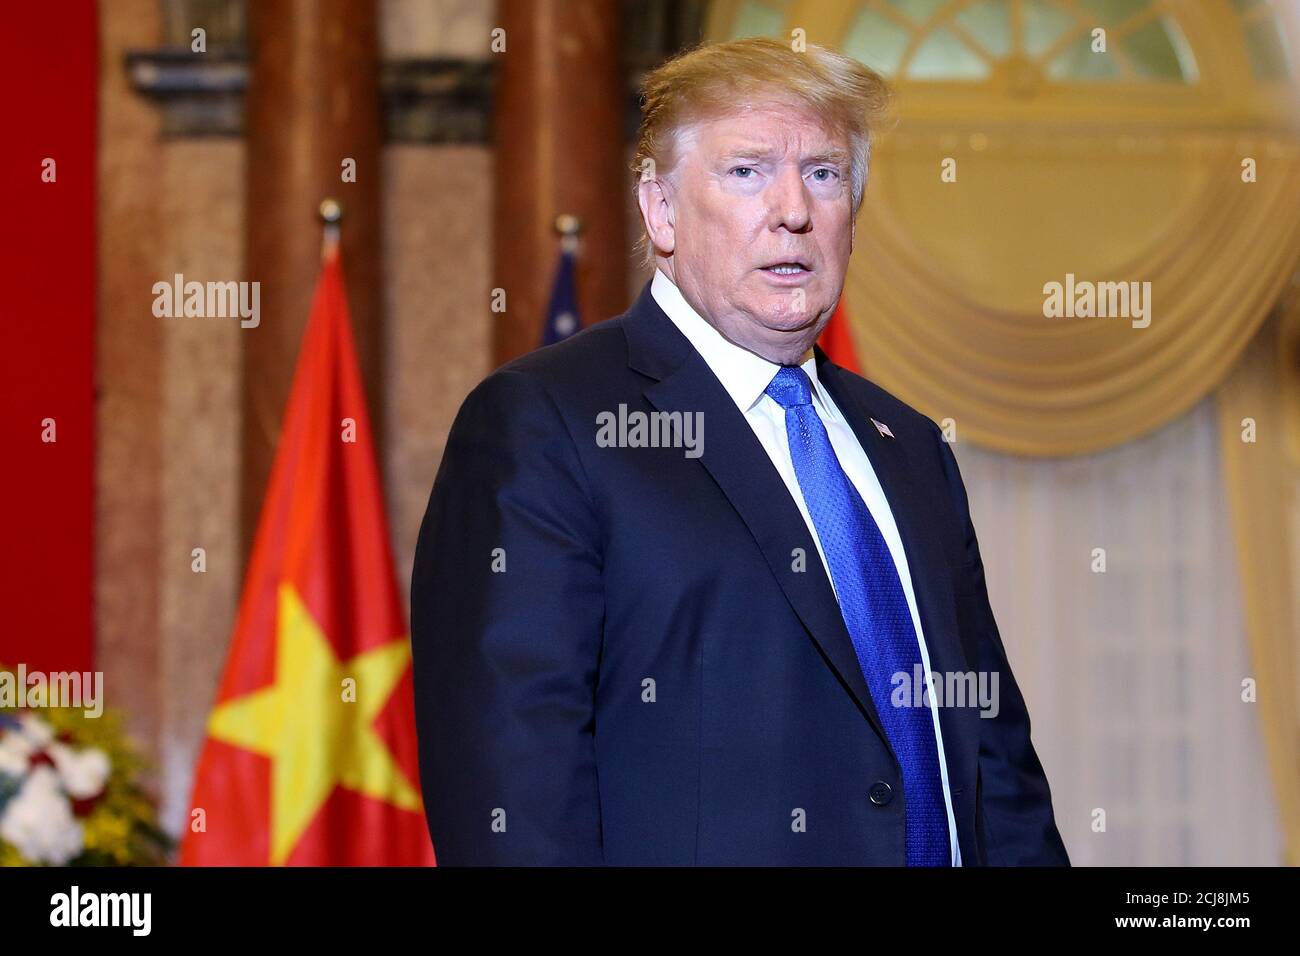 US President Donald J. Trump walks into a meeting room at the Presidential Palace to meet with Vietnamese President Nguyen Phu Trong in Hanoi, Vietnam 27 February 2019, ahead of the second summit between US President Trump and North Korean leader Kim Jong-un. Luong Thai Linh/Pool via Reuters Stock Photo